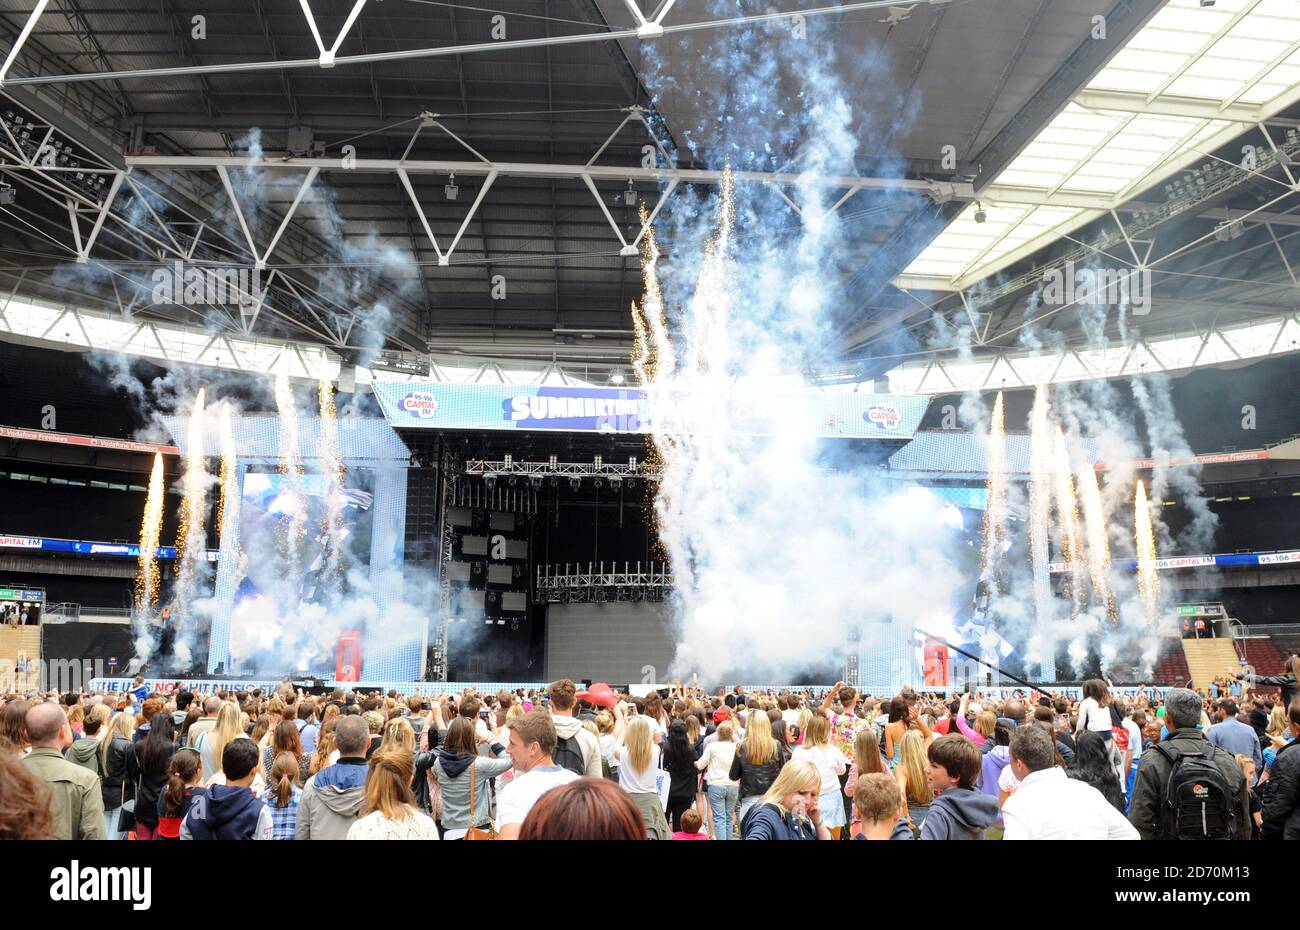 The crowd during Capital FM's Summertime Ball at Wembley Stadium, London. Stock Photo